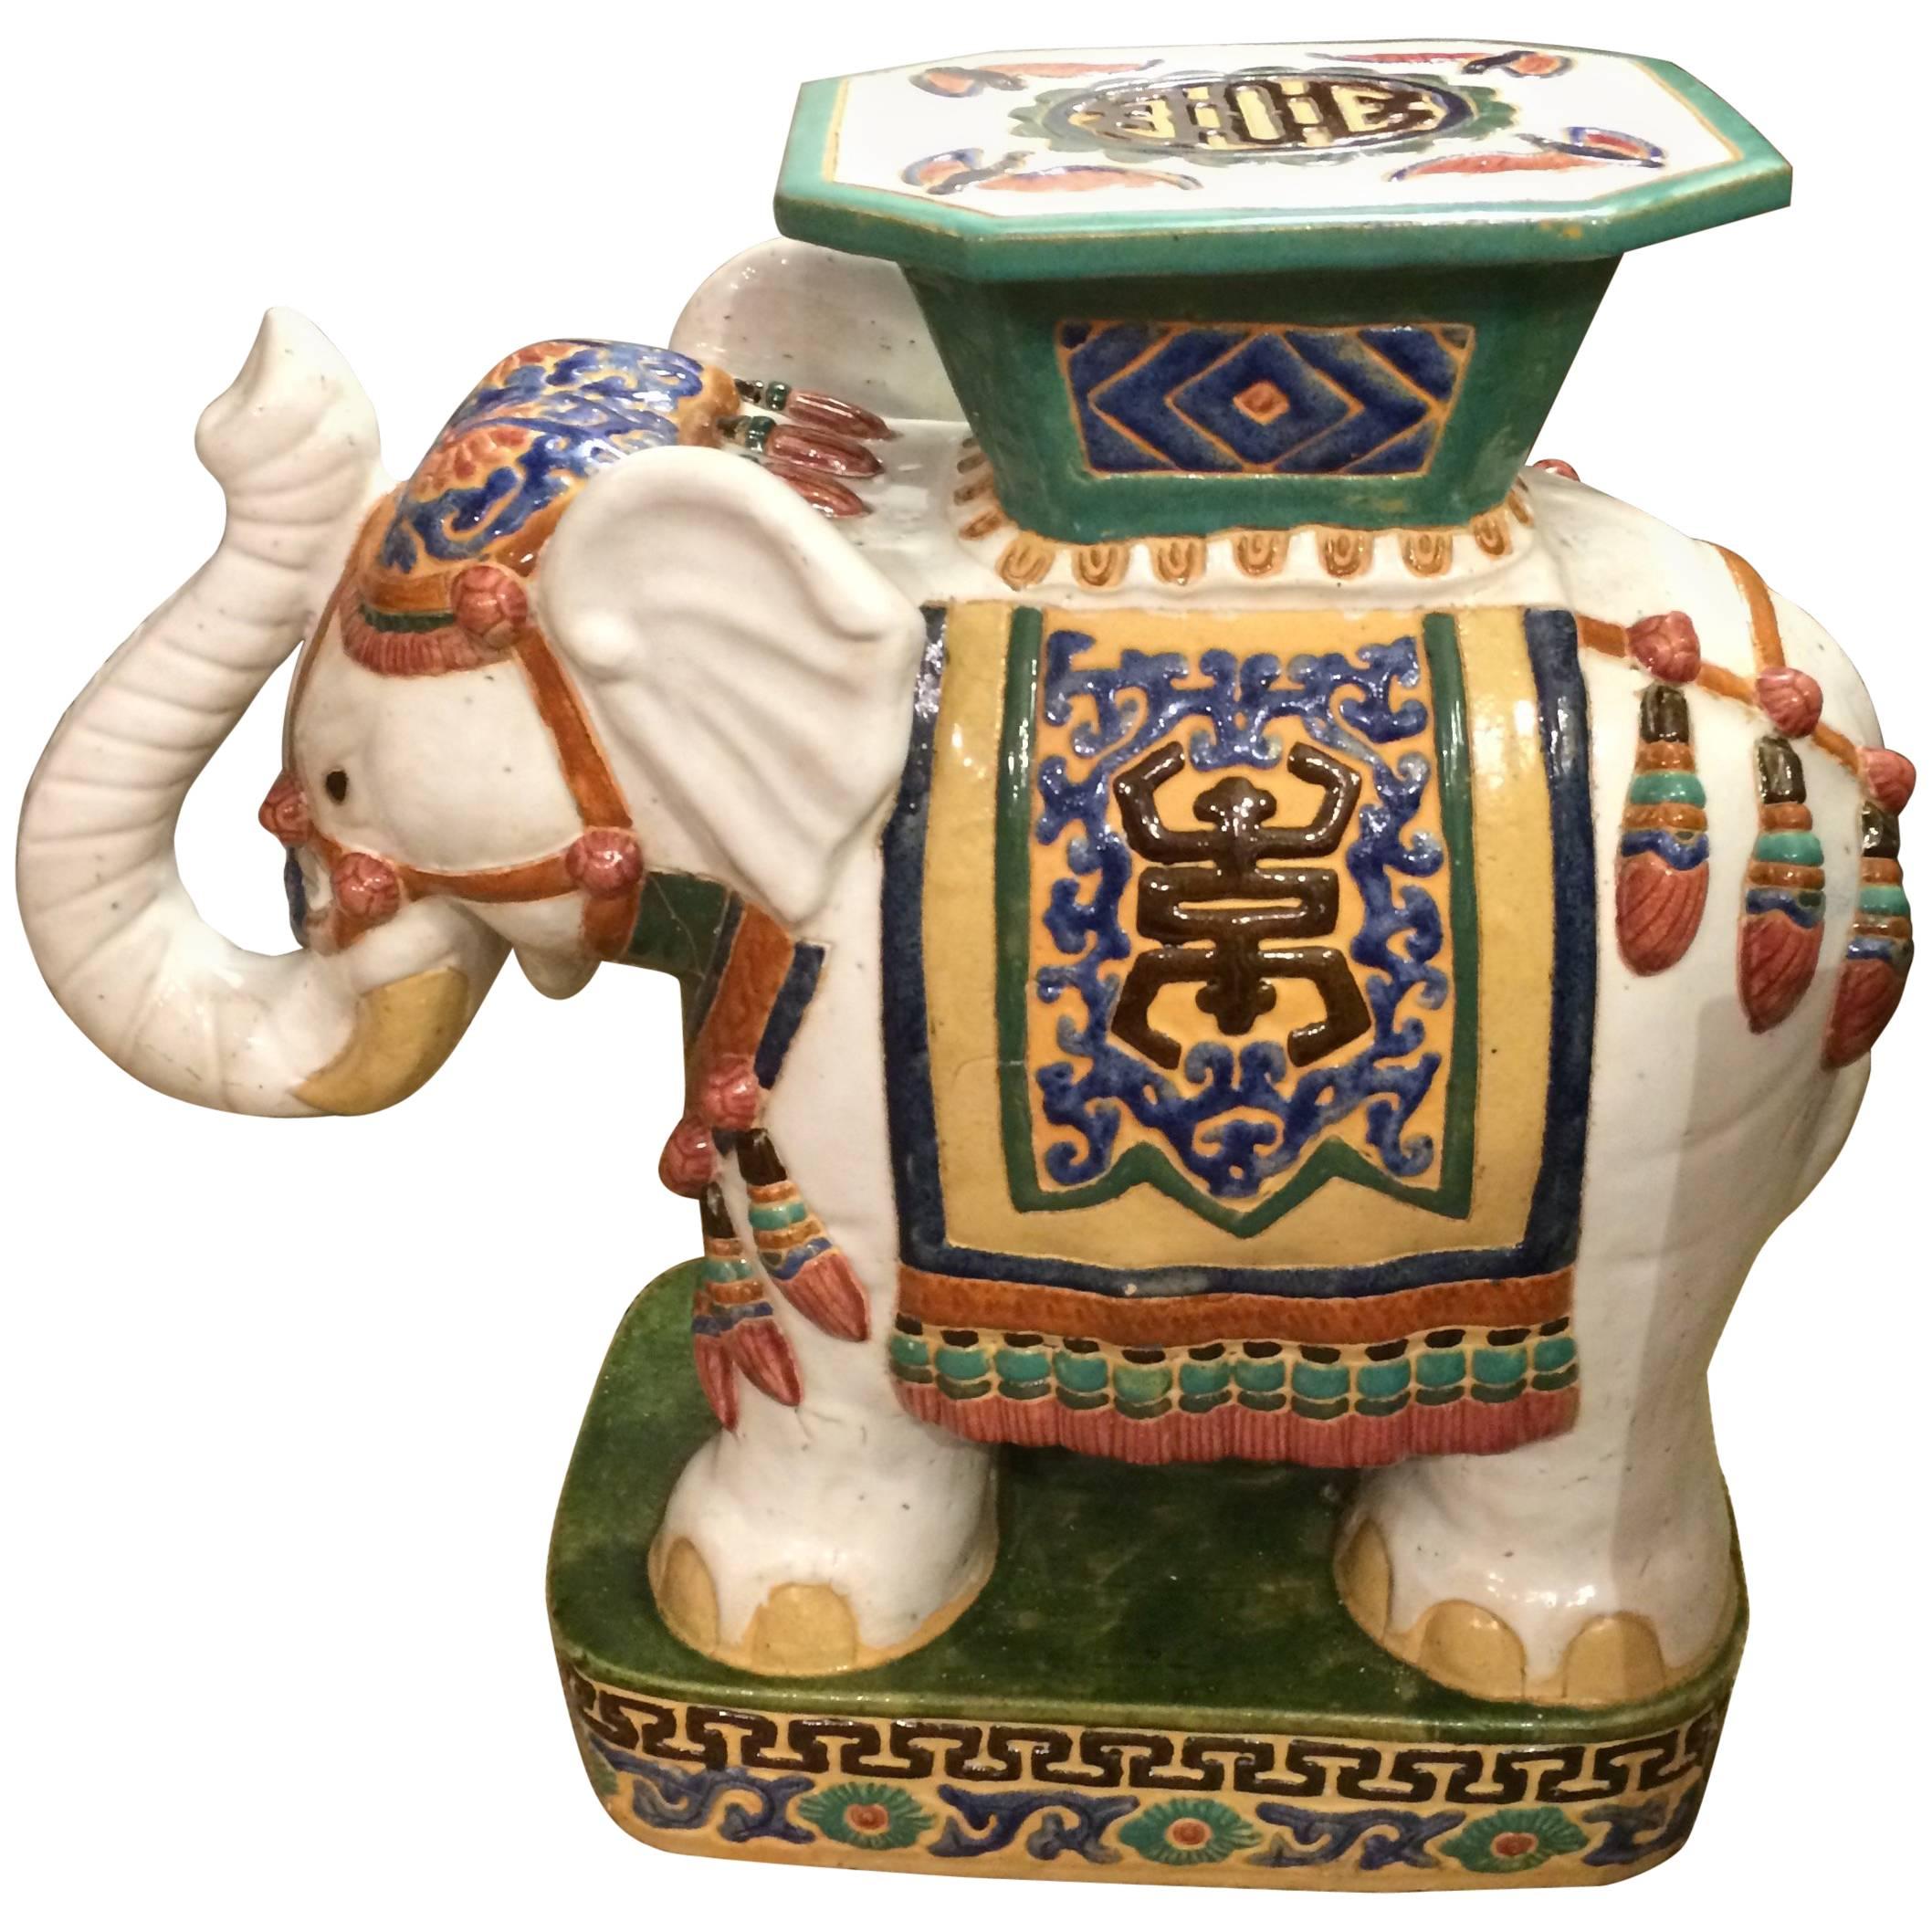 Charming Ceramic Hand-Painted Elephant Garden Seat Table